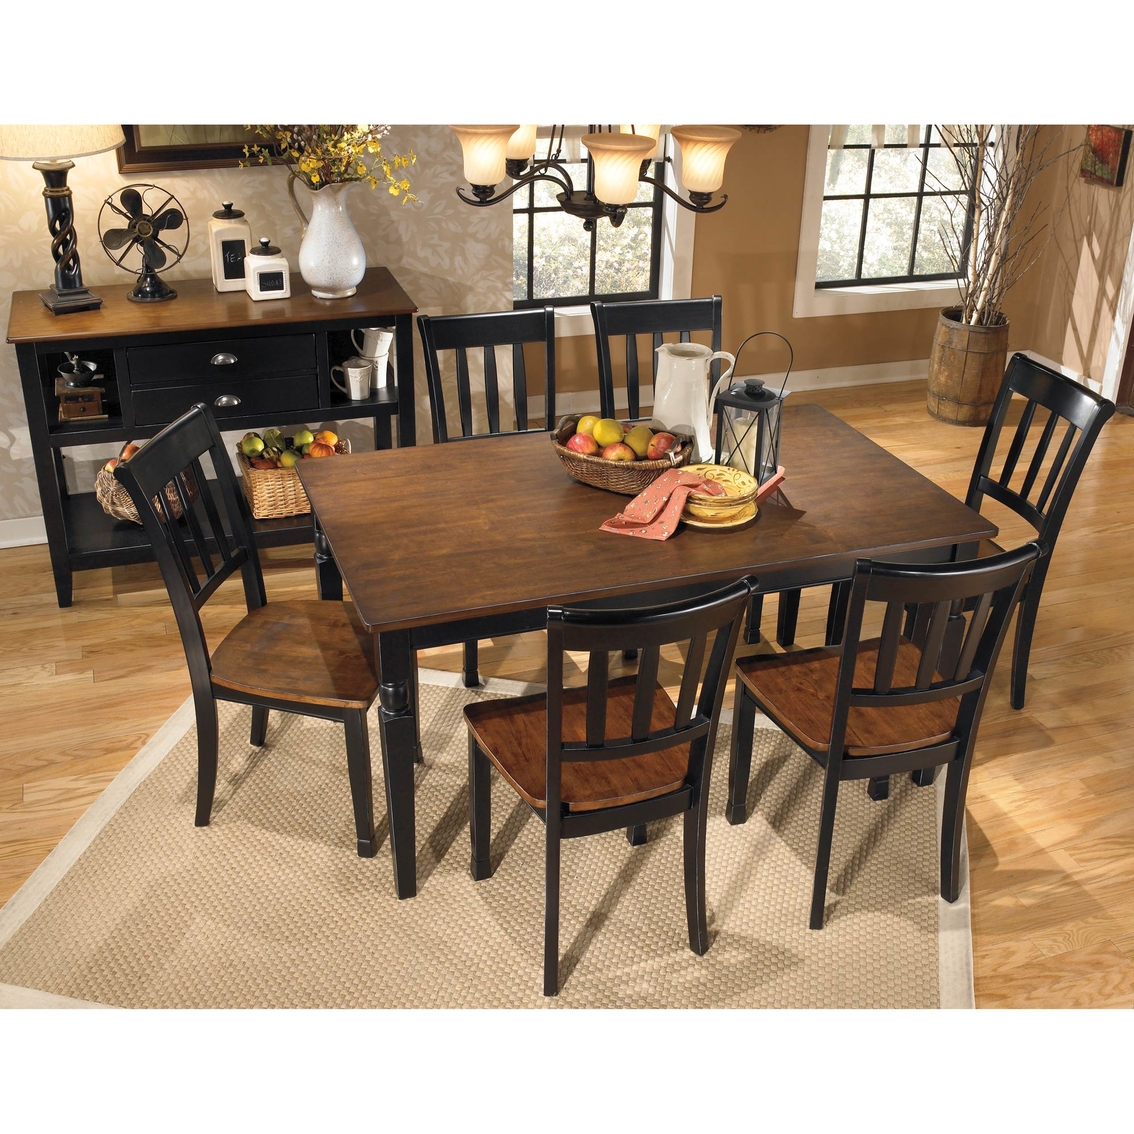 Signature Design by Ashley Owingsville 7 Pc. Dining Set - Image 2 of 2